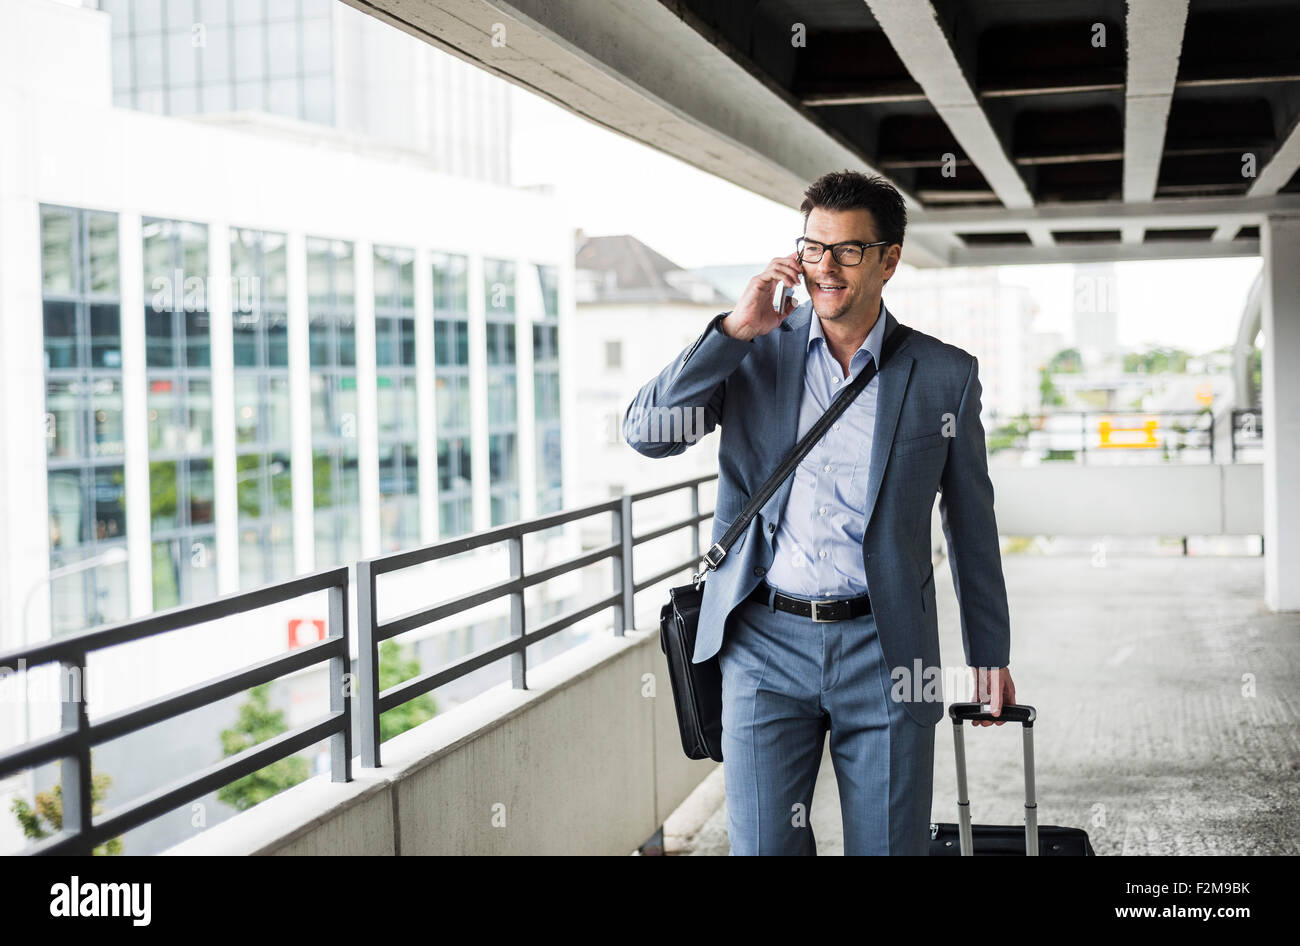 Businessman on business trip telephoning with smartphone Stock Photo